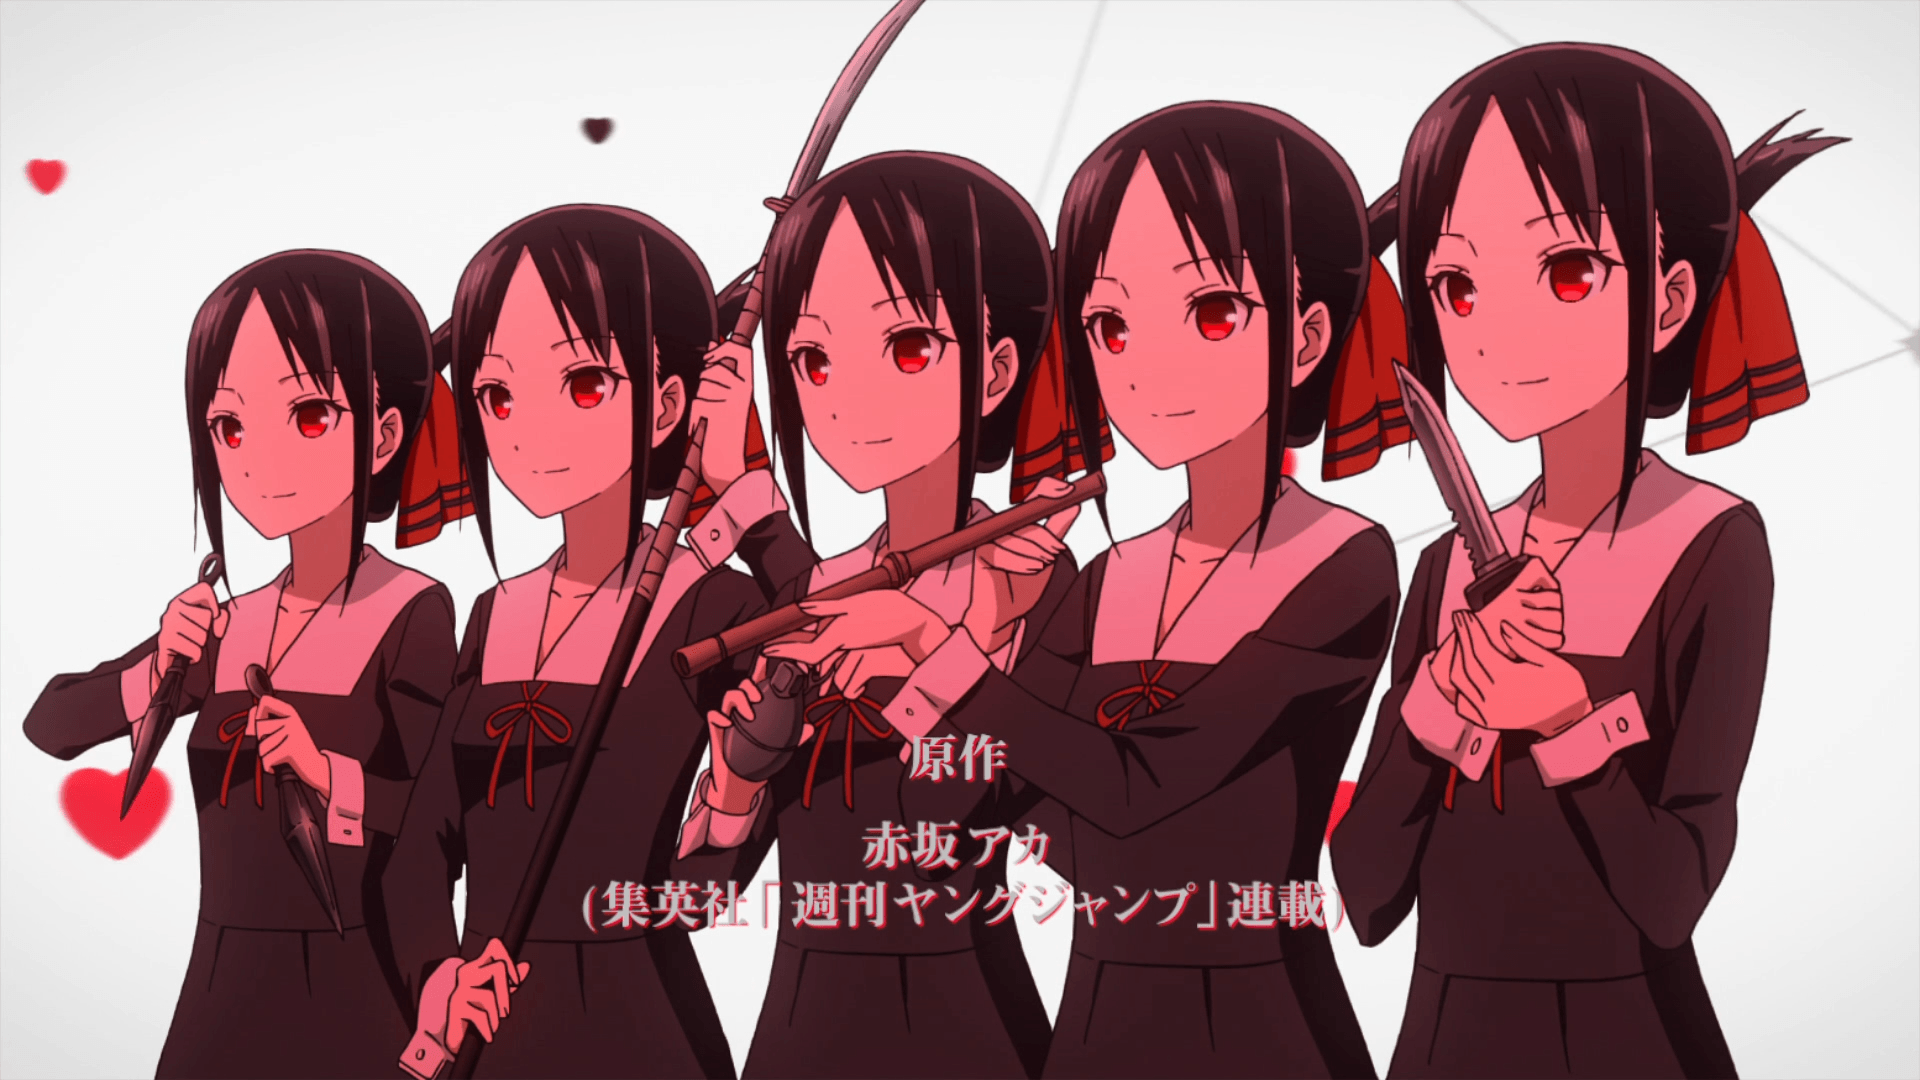 Kaguya Sama Love Is War Wallpaper All Products Are Discounted Cheaper Than Retail Price Free Delivery Returns Off 75